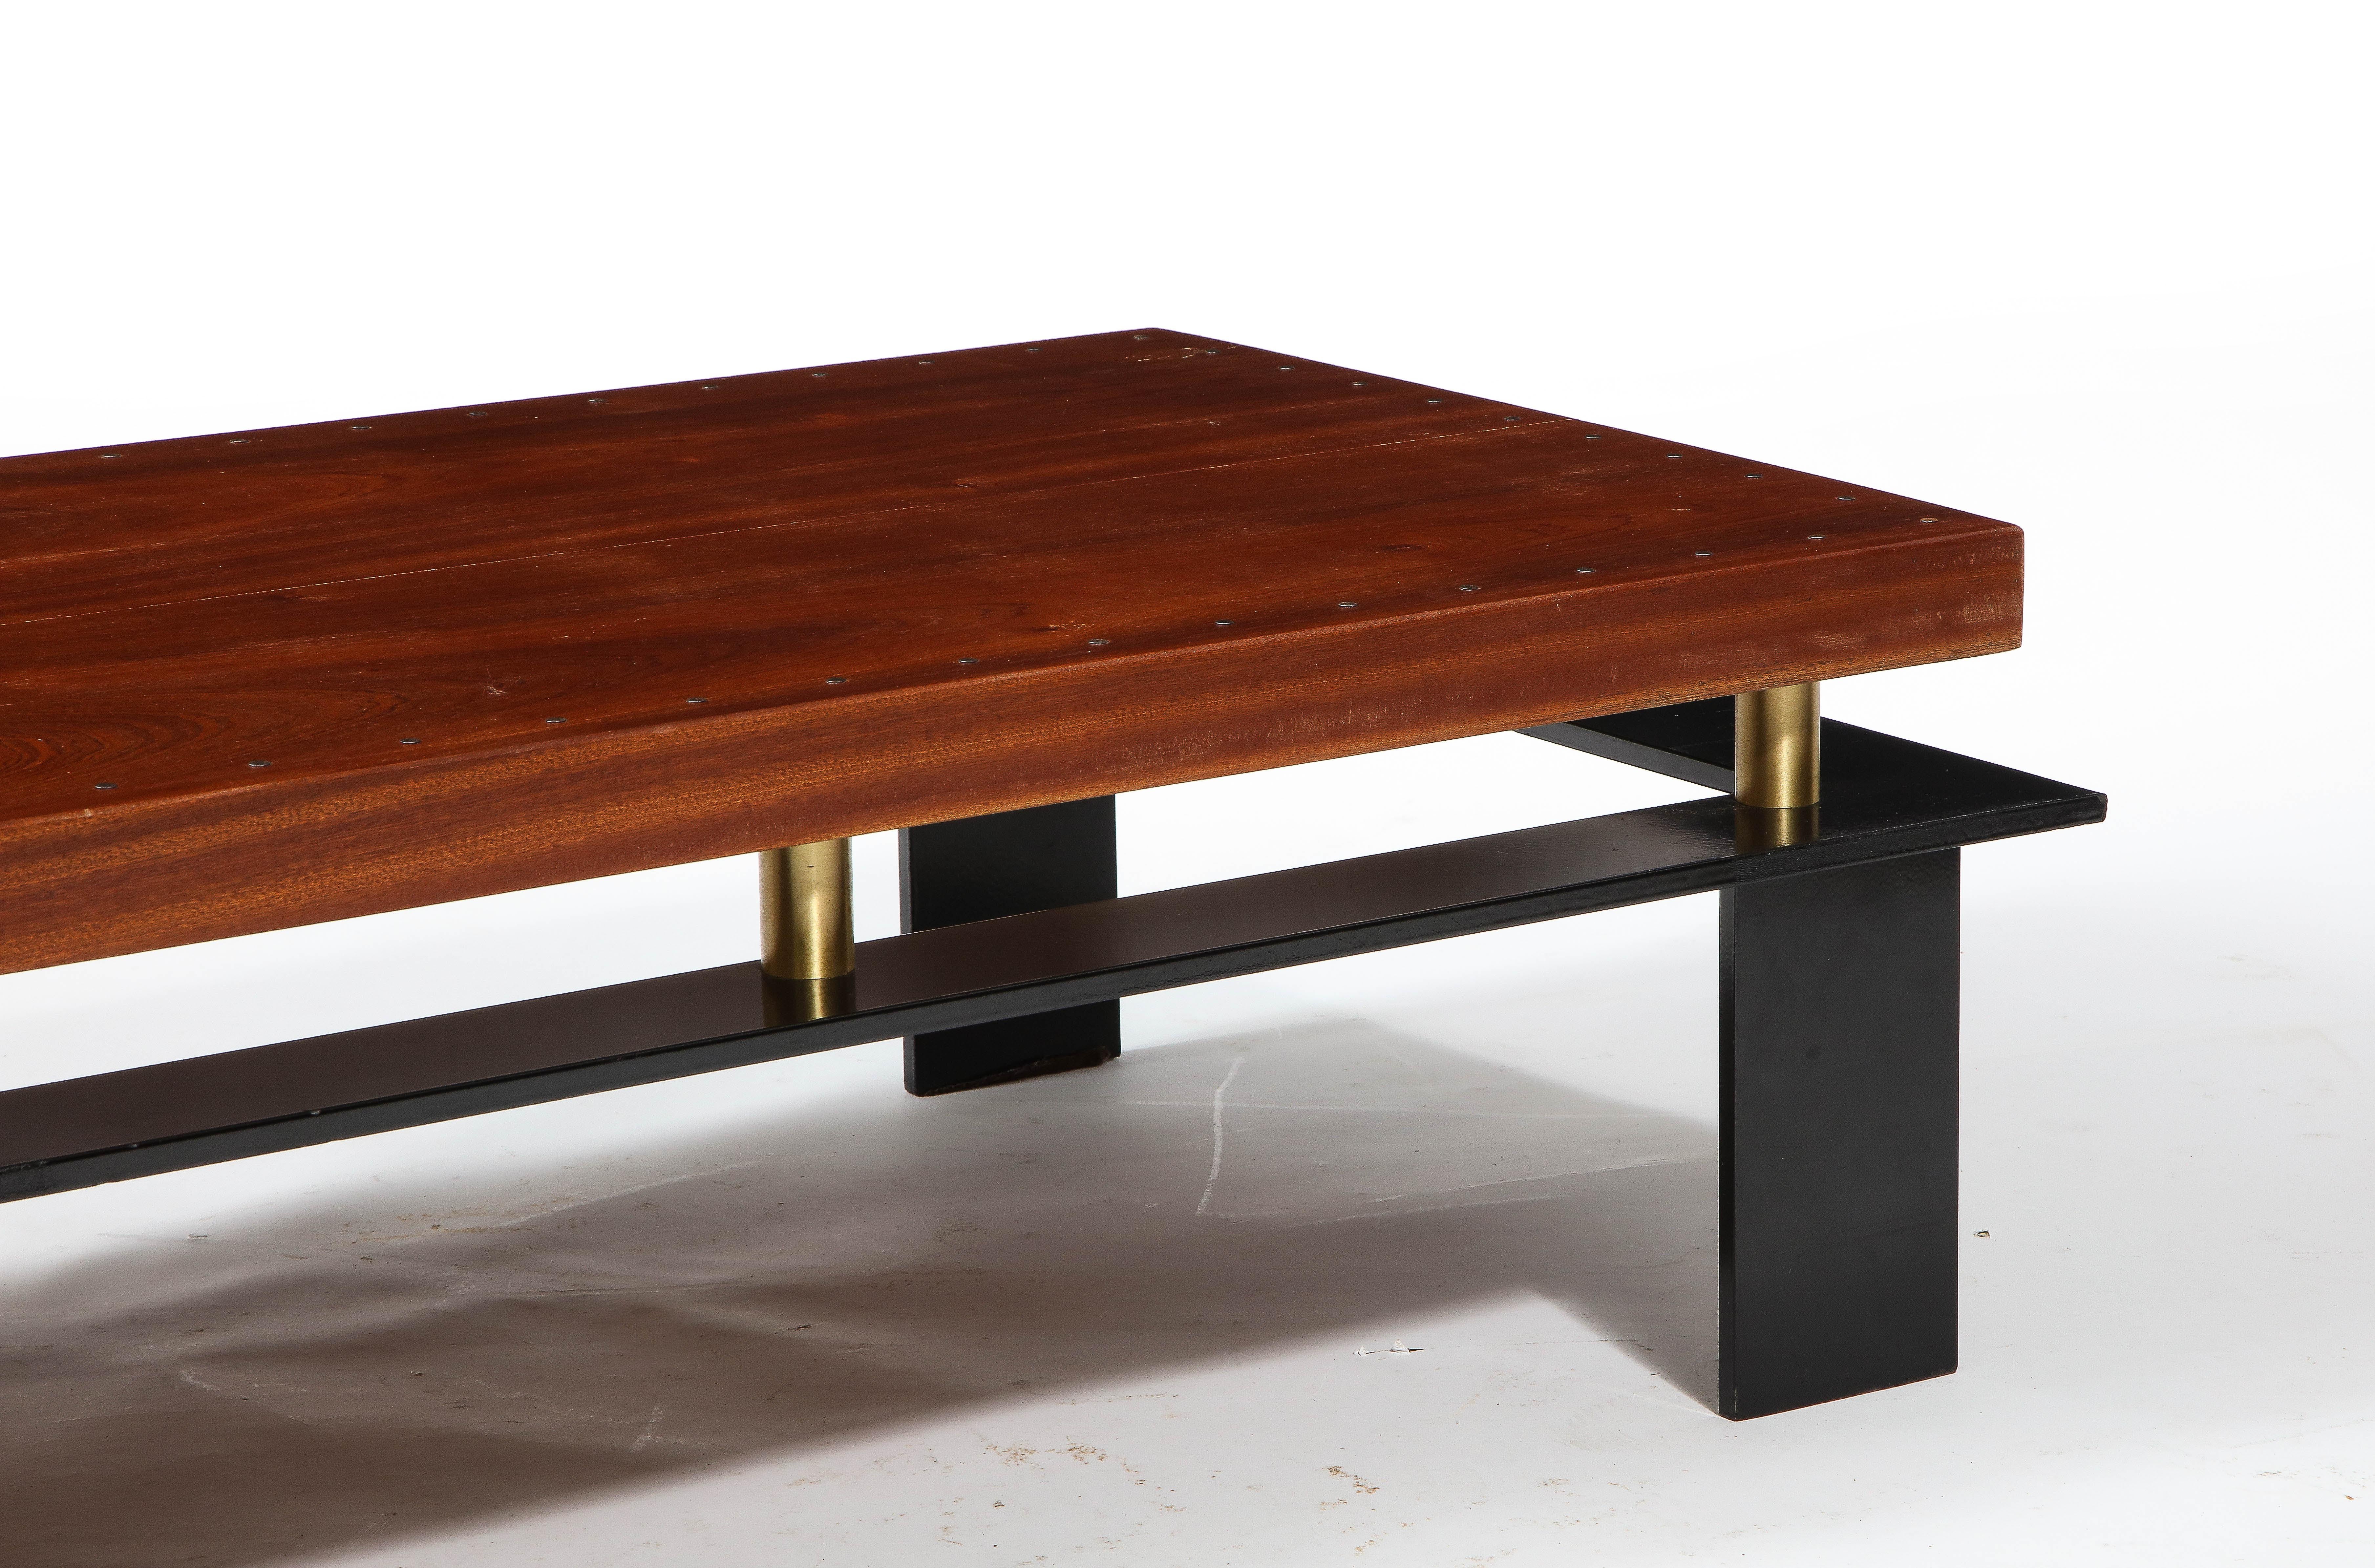 Large Long Low Modernist Steel & Walnut Coffee Table, France 1970's For Sale 2